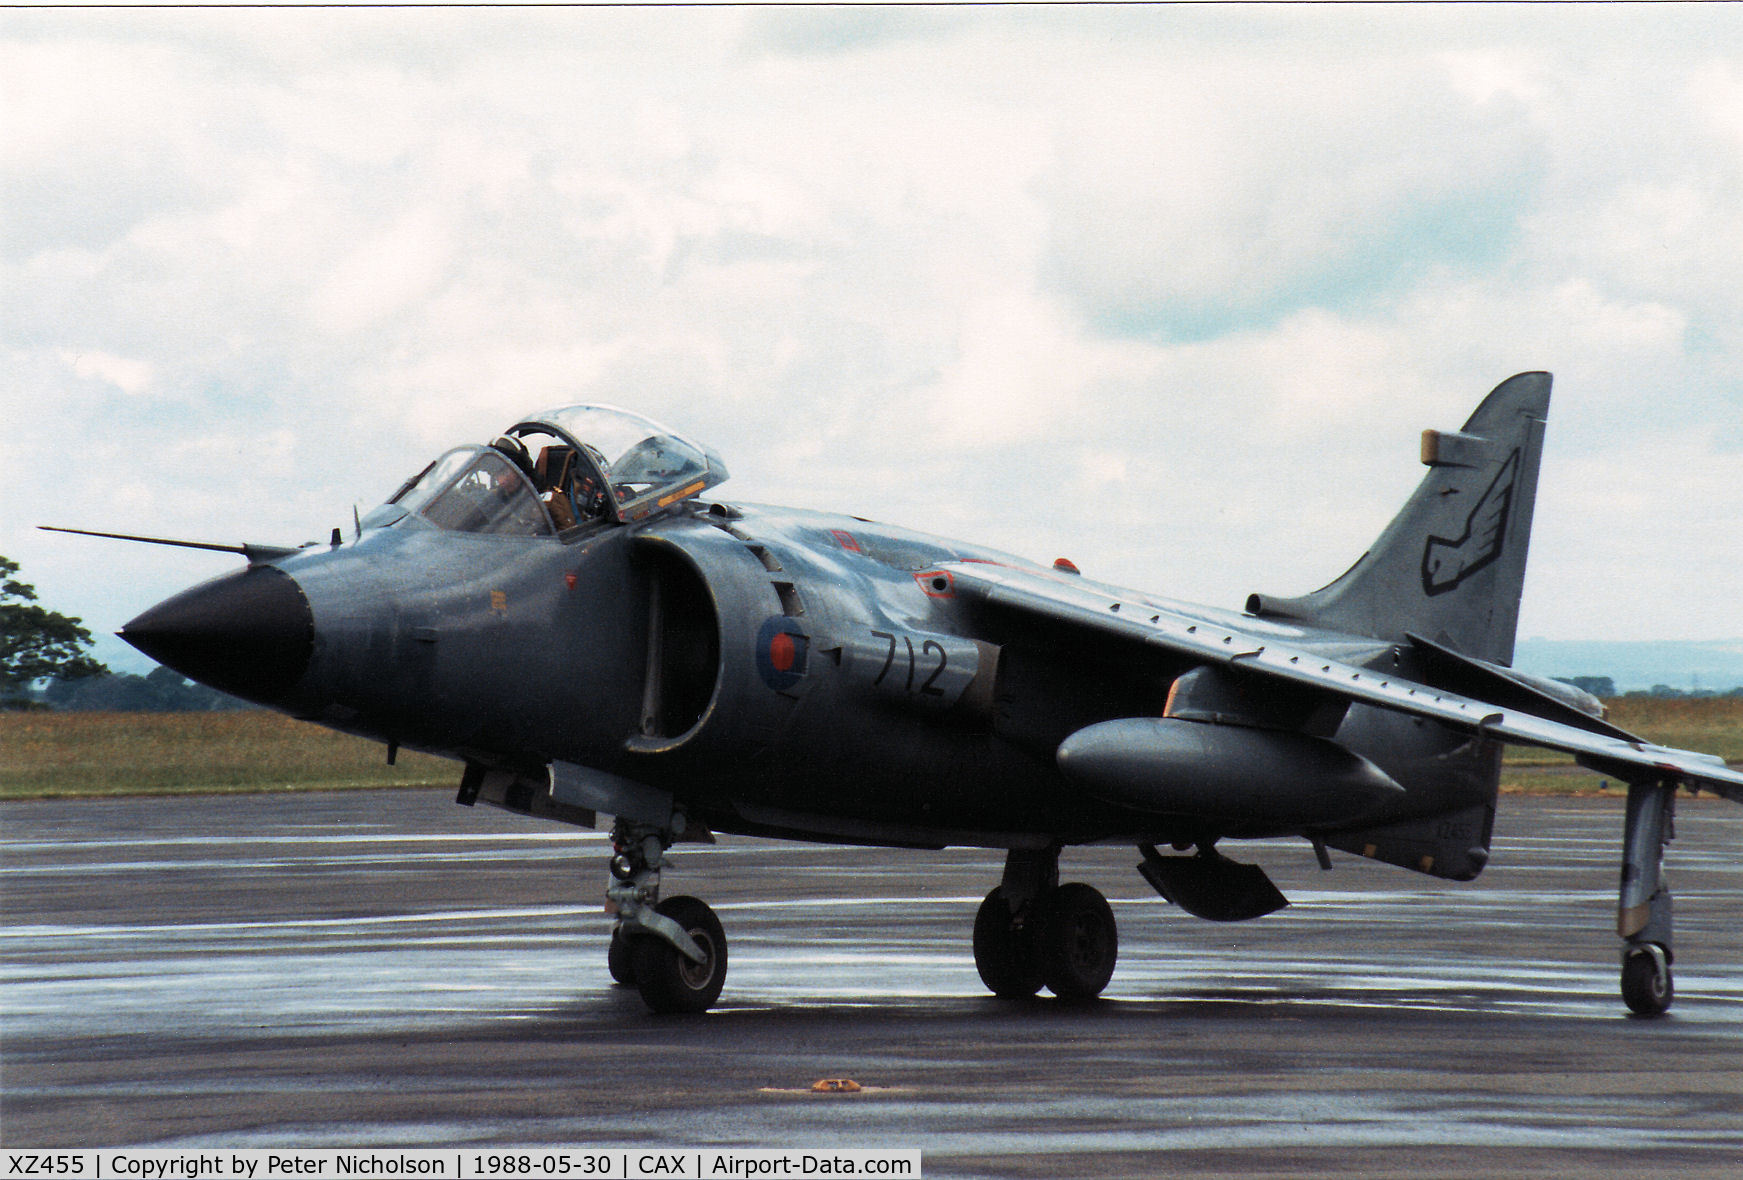 XZ455, 1979 British Aerospace Sea Harrier FRS.1 C/N 41H-912009, Sea Harrier FRS.1 of 899 Squadron at RNAS Yeovilton on a visit to Carlisle in May 1988.